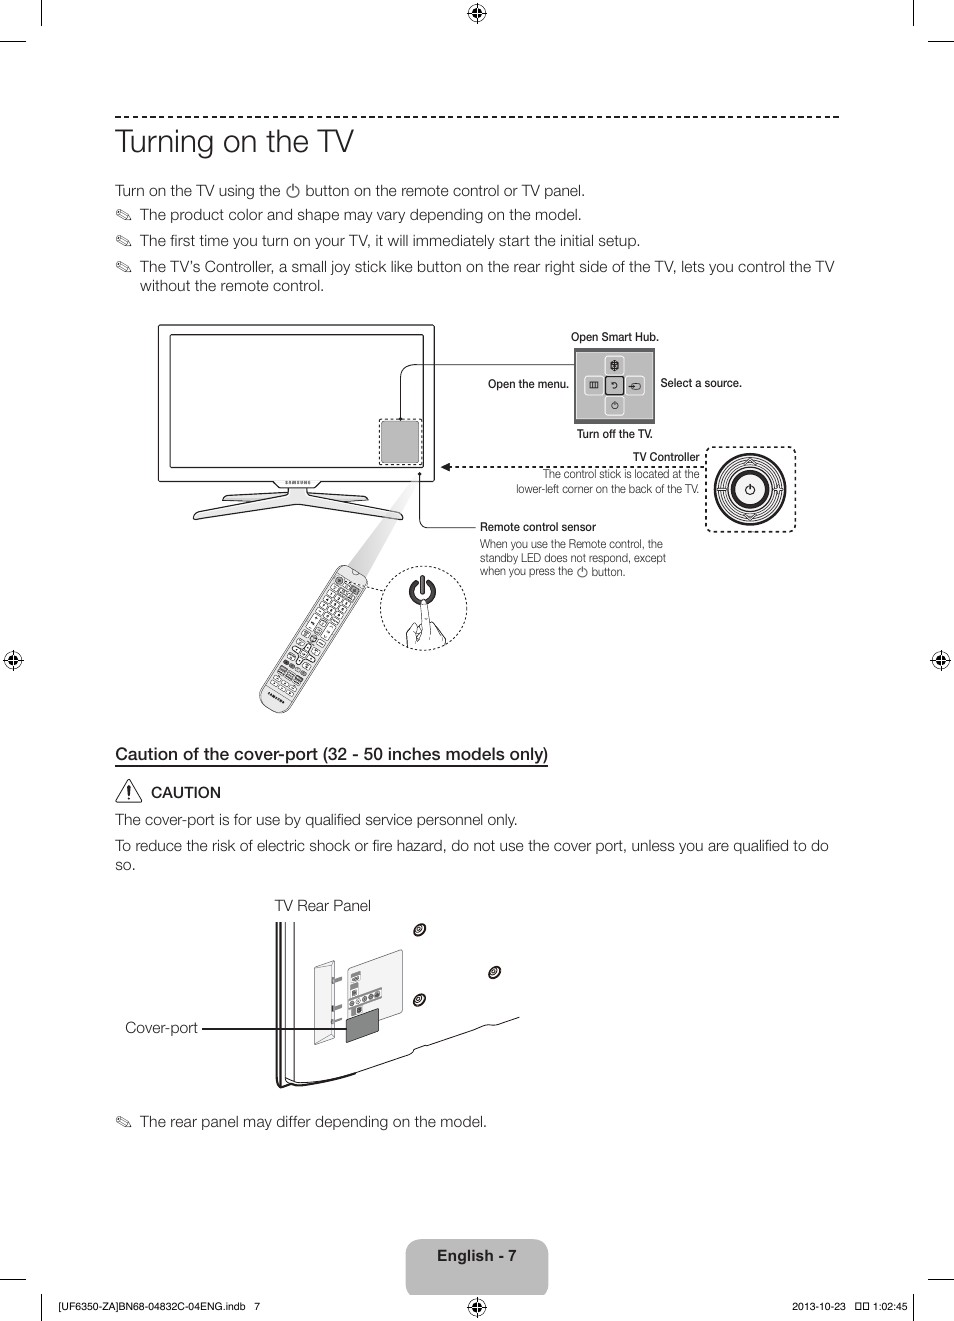 Turning on the tv | Samsung UN40F6350AFXZA User Manual | Page 7 / 26